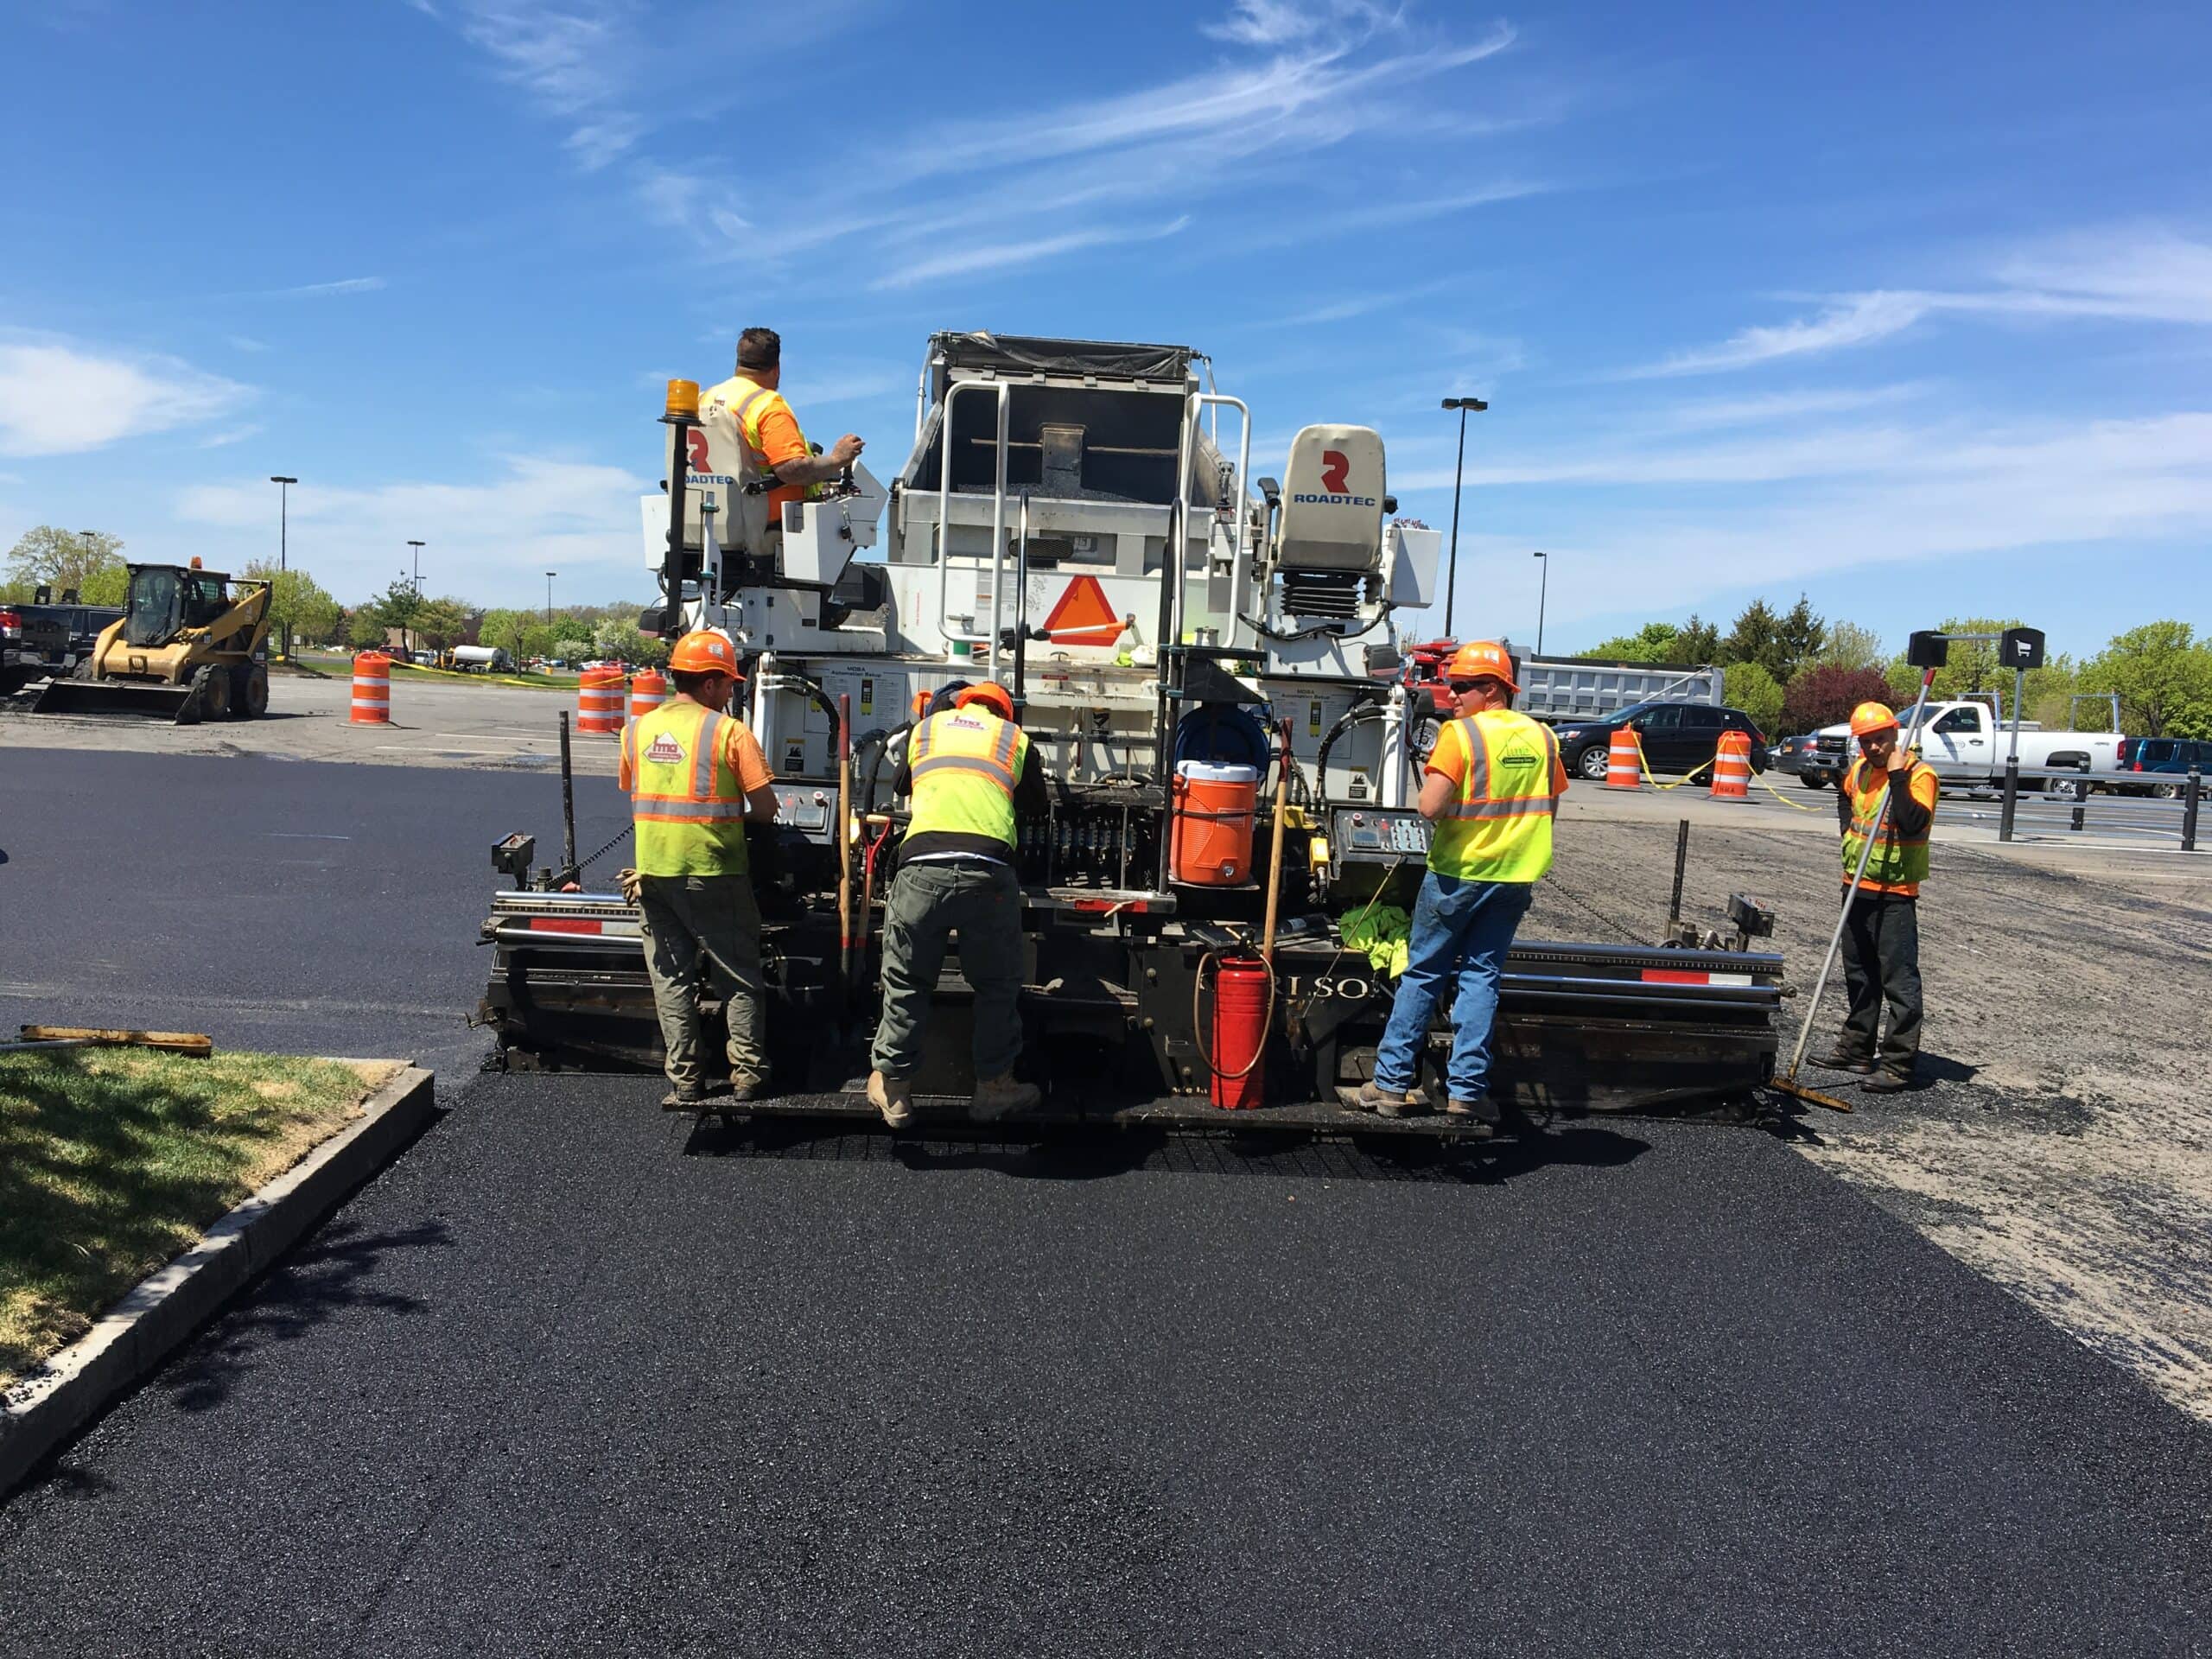 HMA employees working on a parking lot paving project